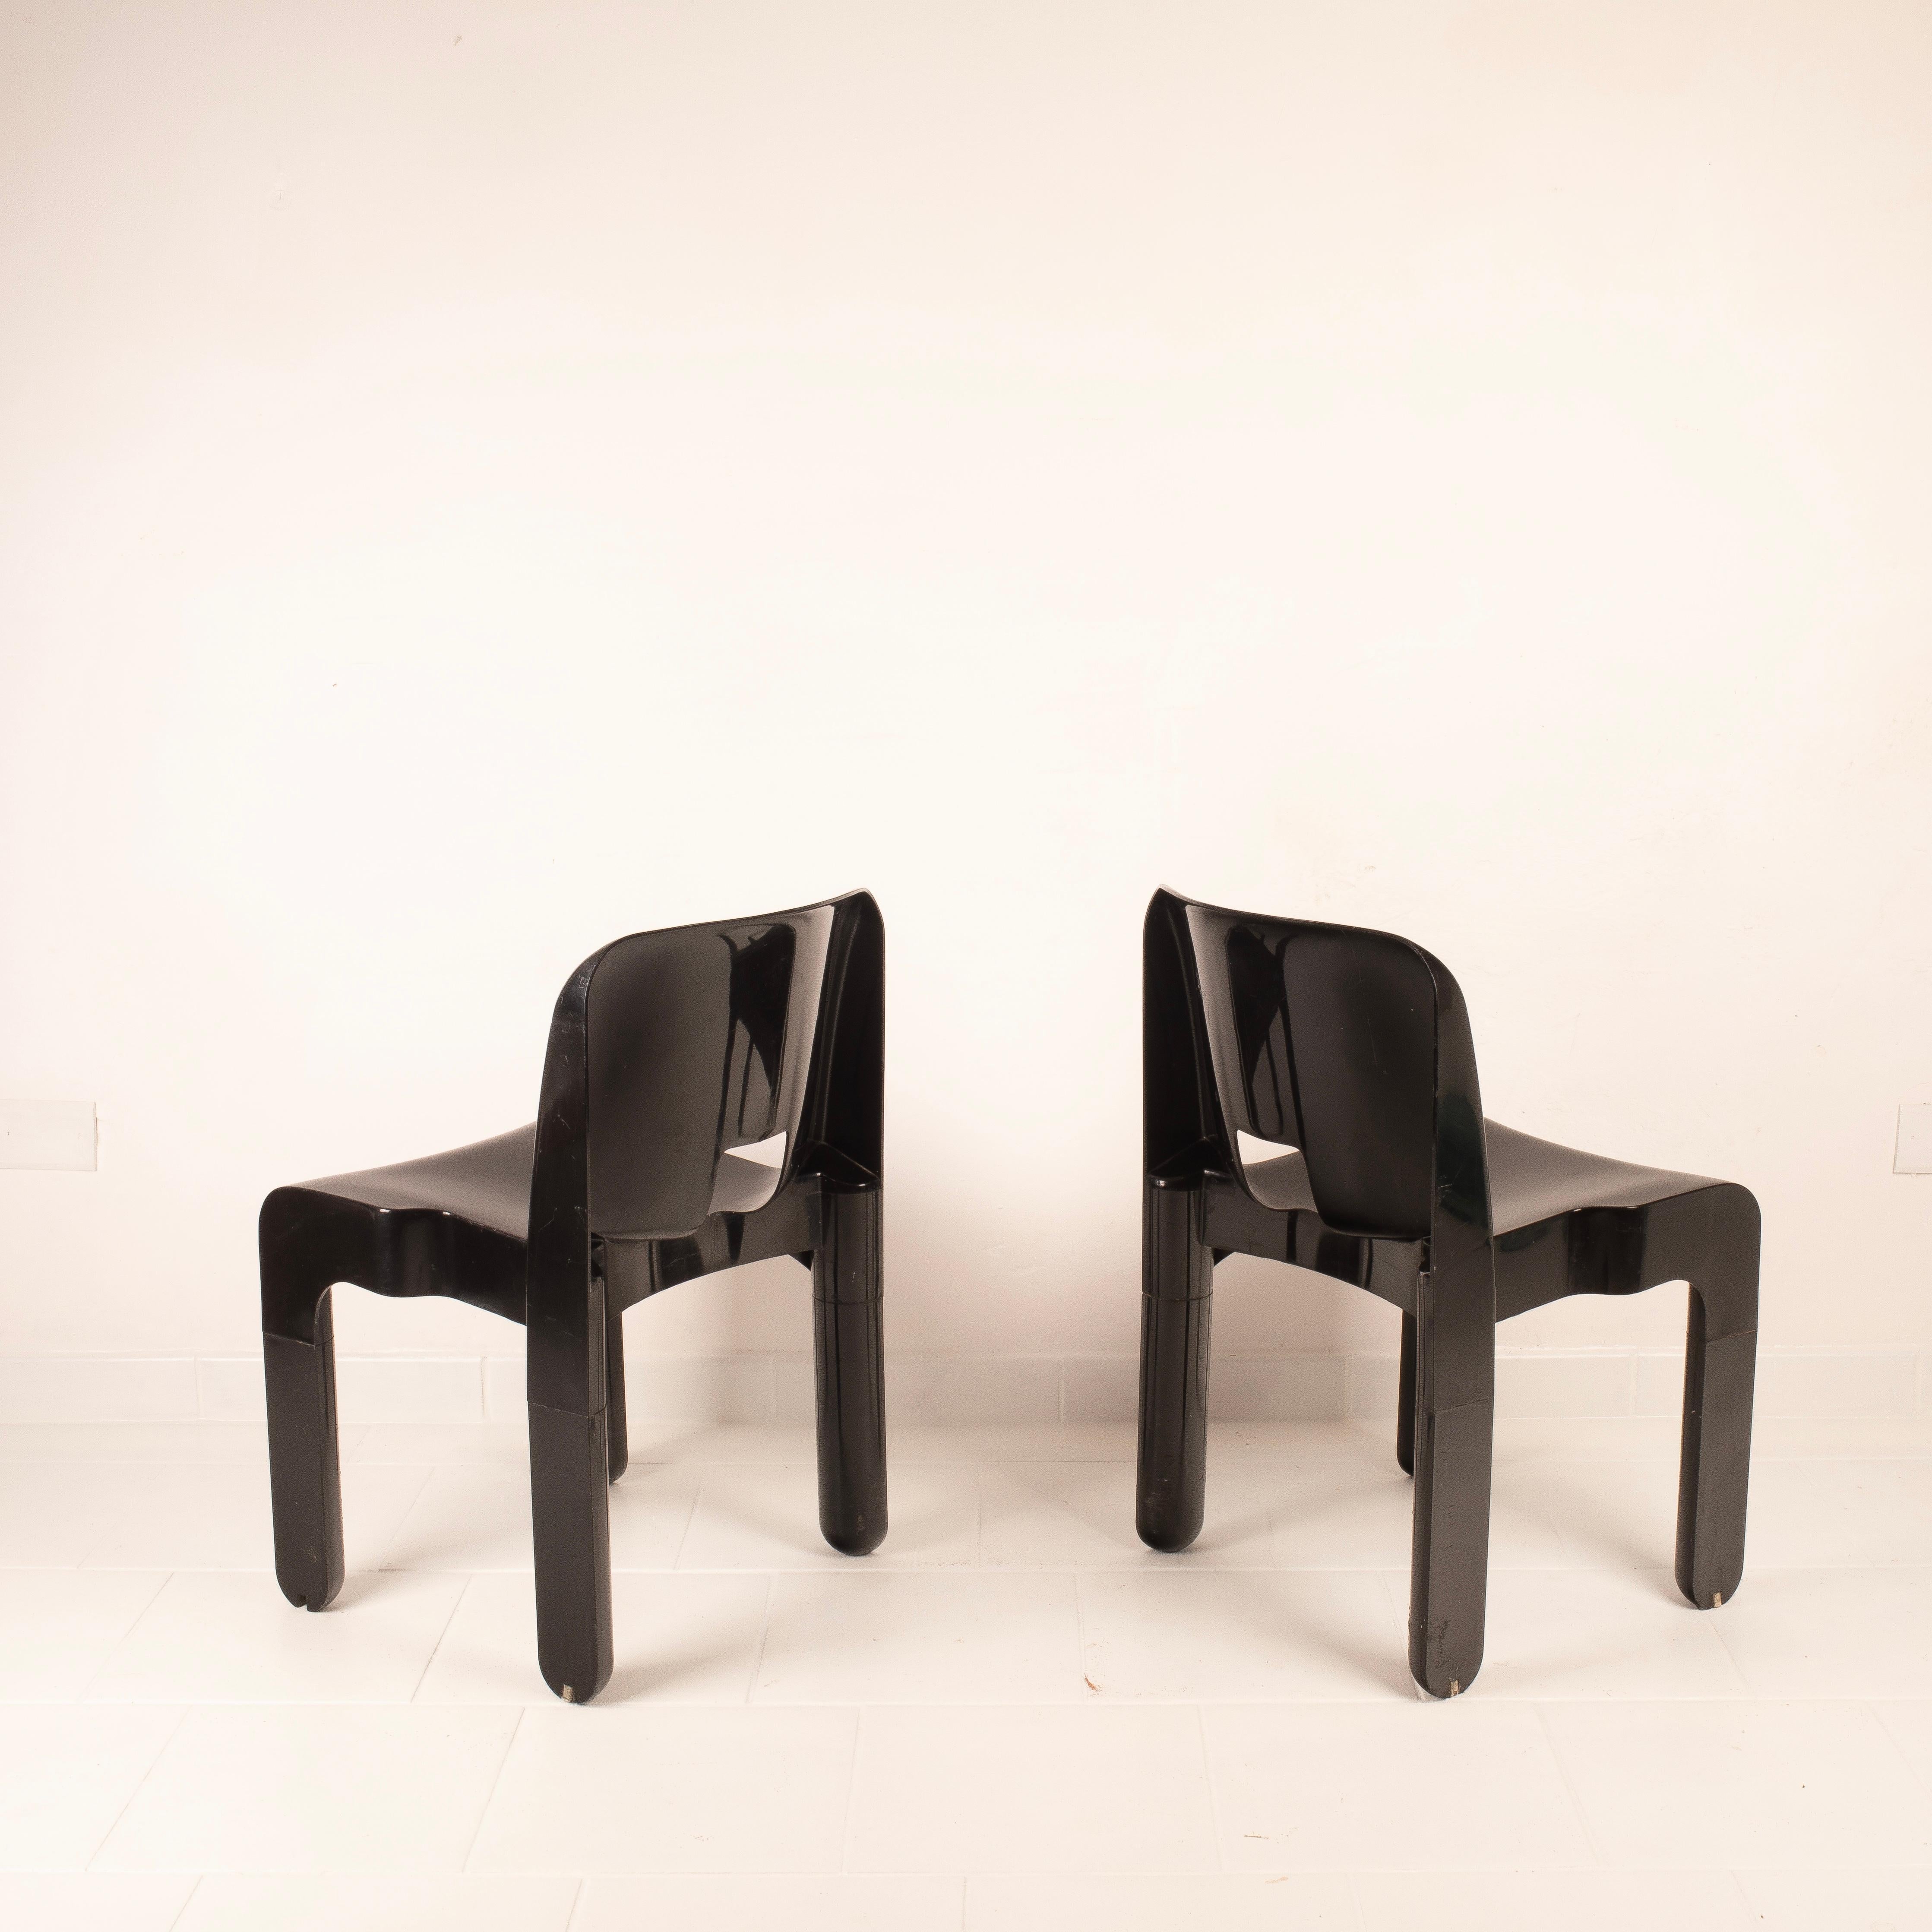 Space Age Pair of Universal Chairs 4869 Black by Joe Colombo for Kartell For Sale